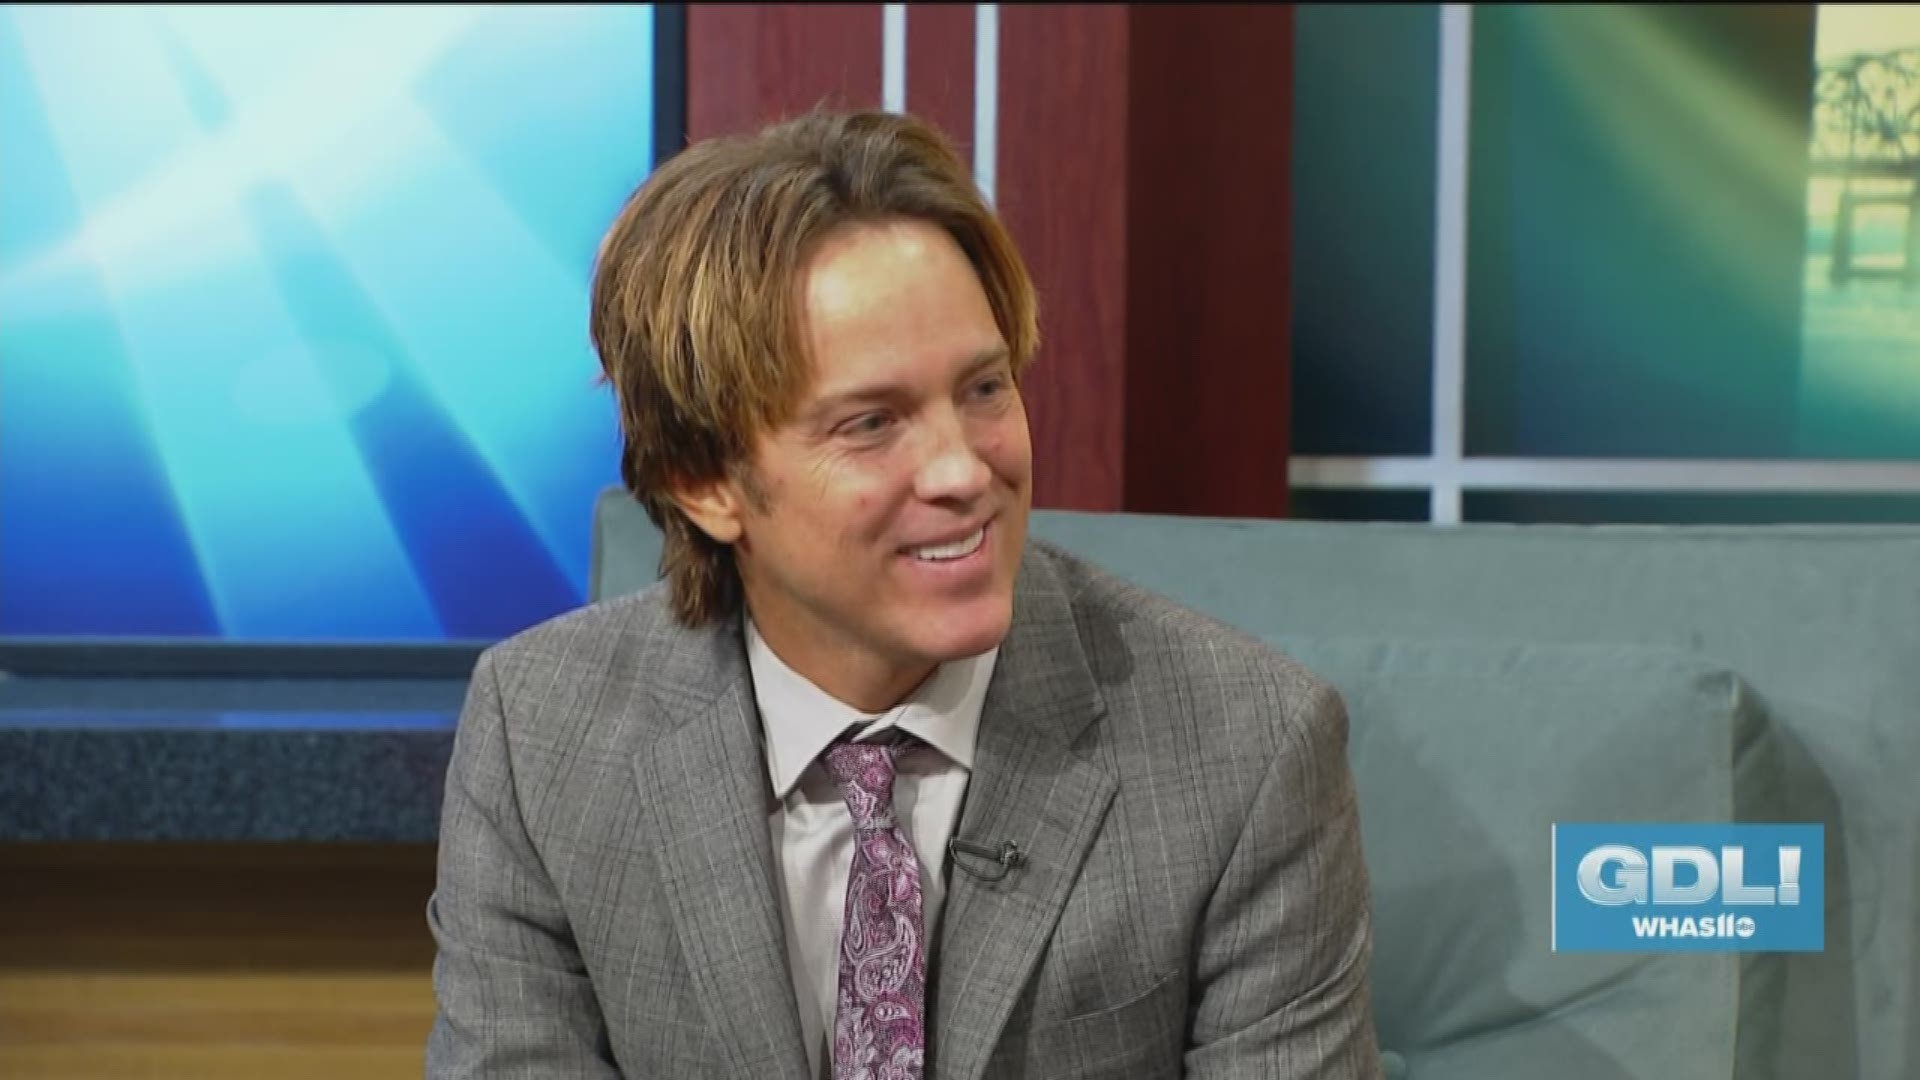 Larry Birkhead stopped by Great Day Live to talk about the new documentary about his relationship with Anna Nicole Smith.